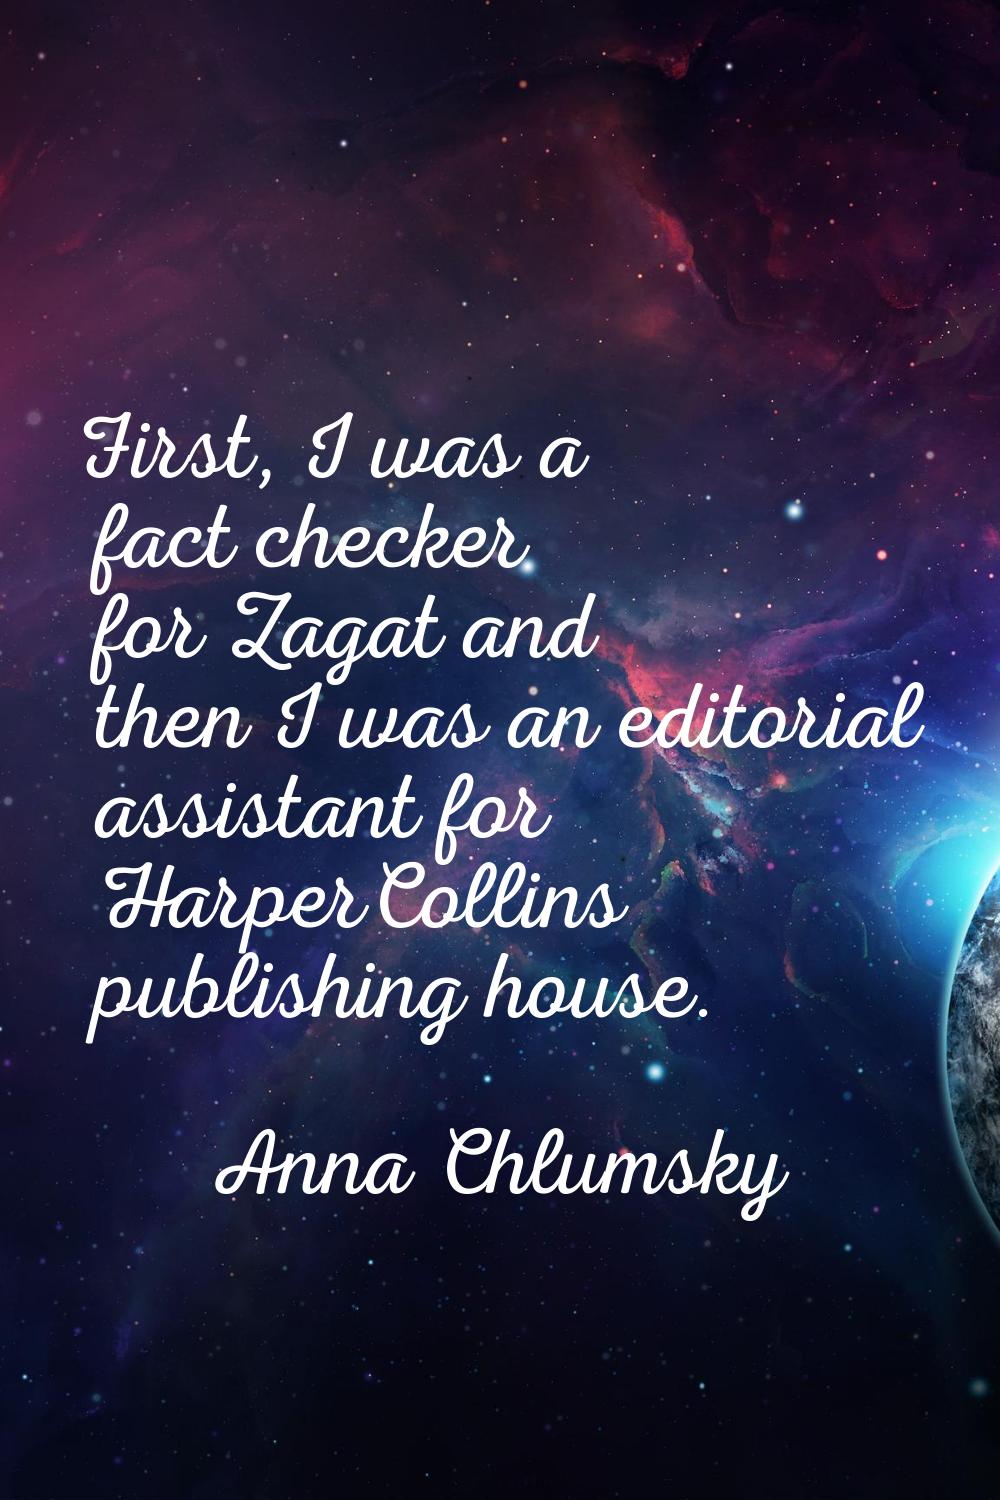 First, I was a fact checker for Zagat and then I was an editorial assistant for HarperCollins publi